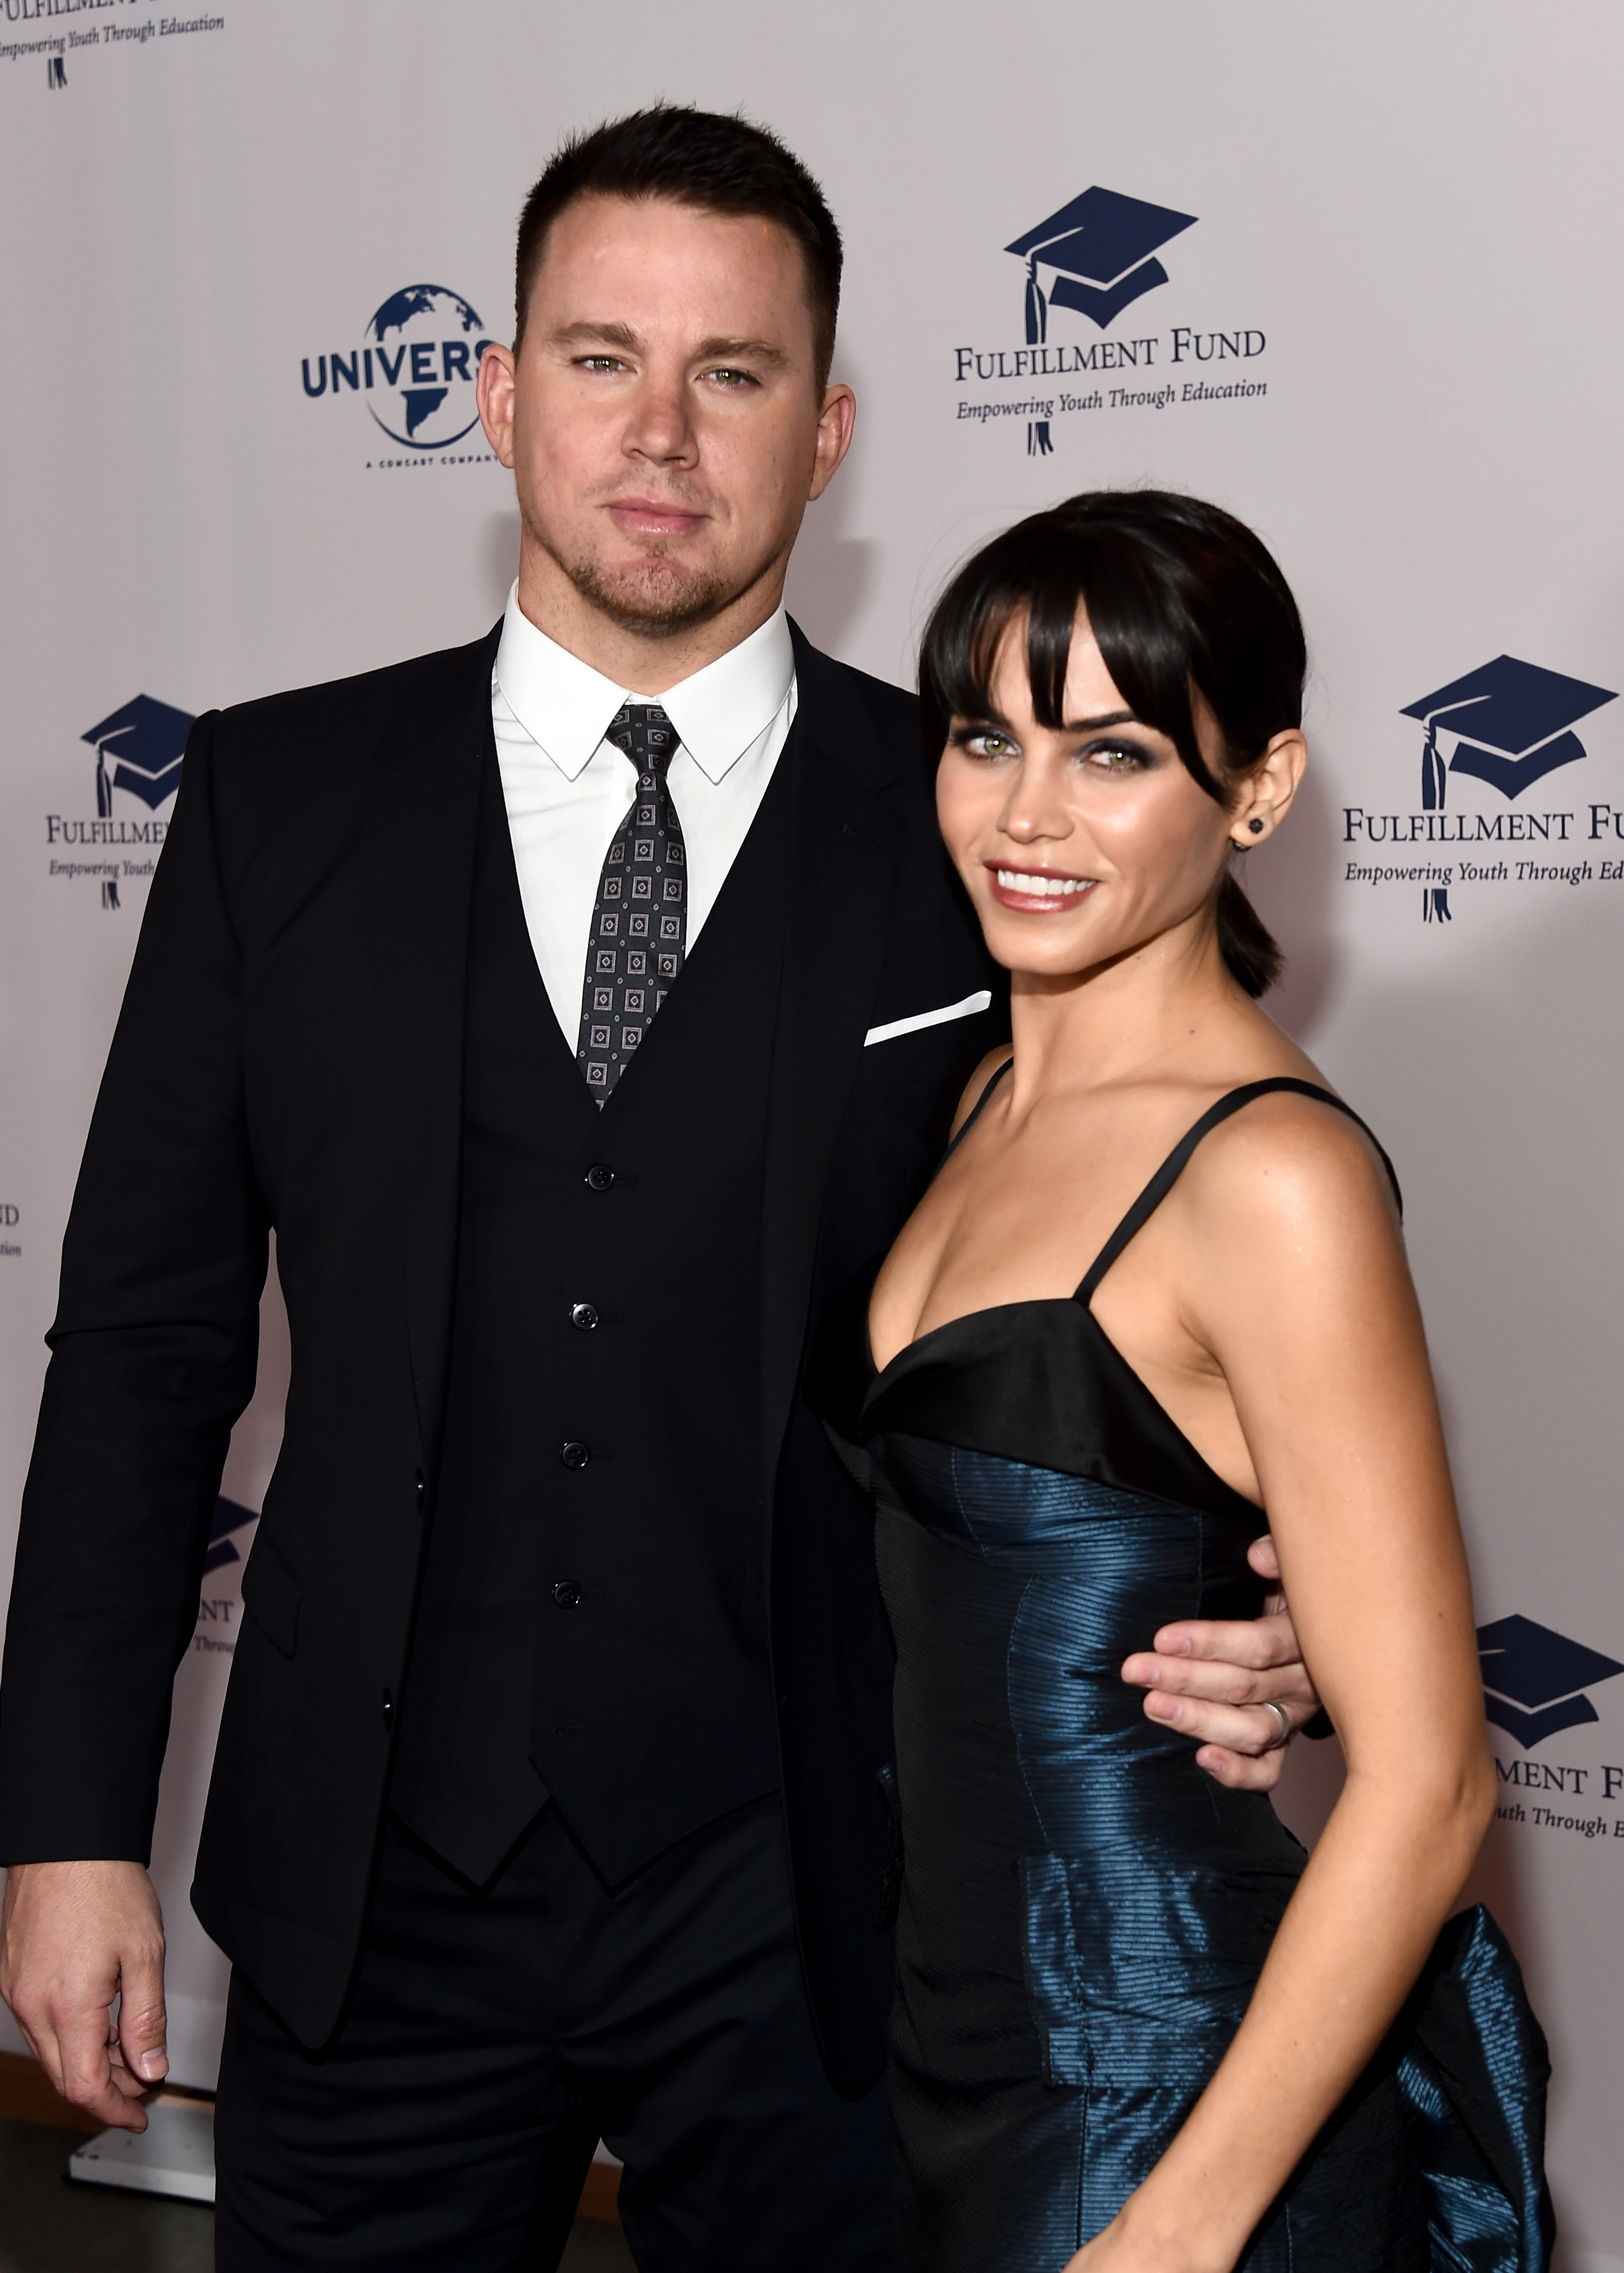 Channing Tatum in a black suit and Jenna Dewan in a strapless dress posing at an event